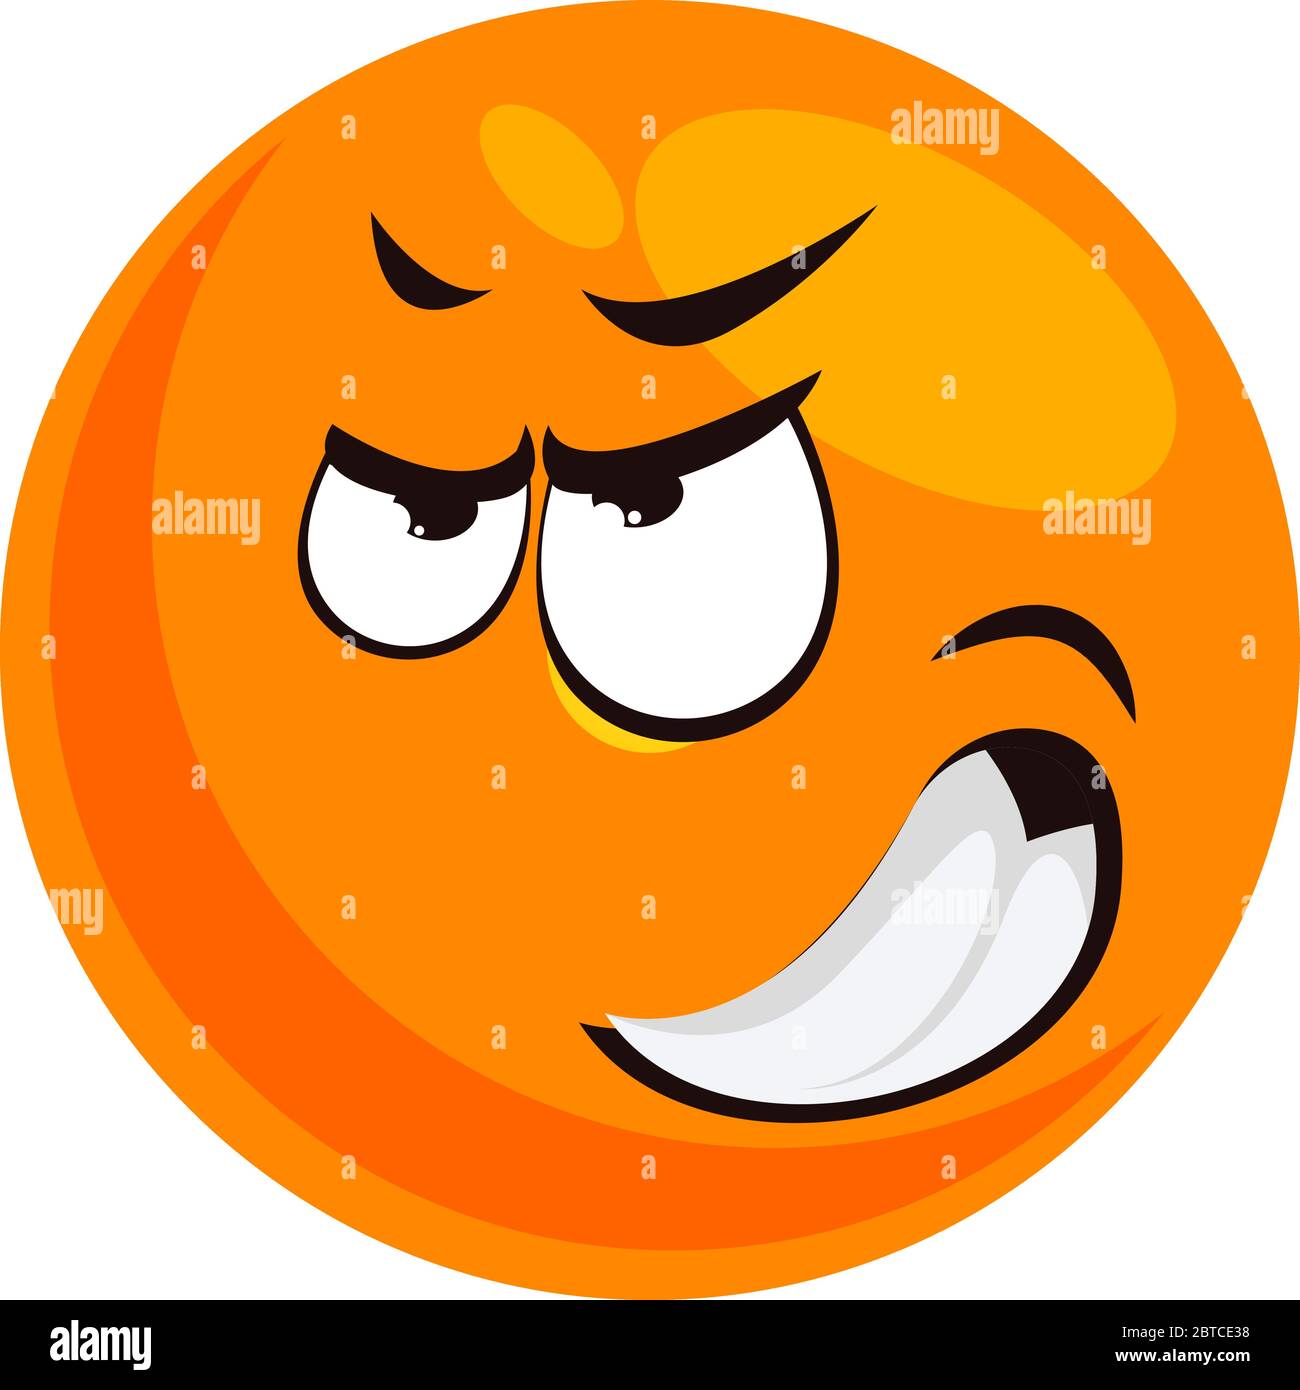 Angry emoji, illustration, vector on white background Stock Vector